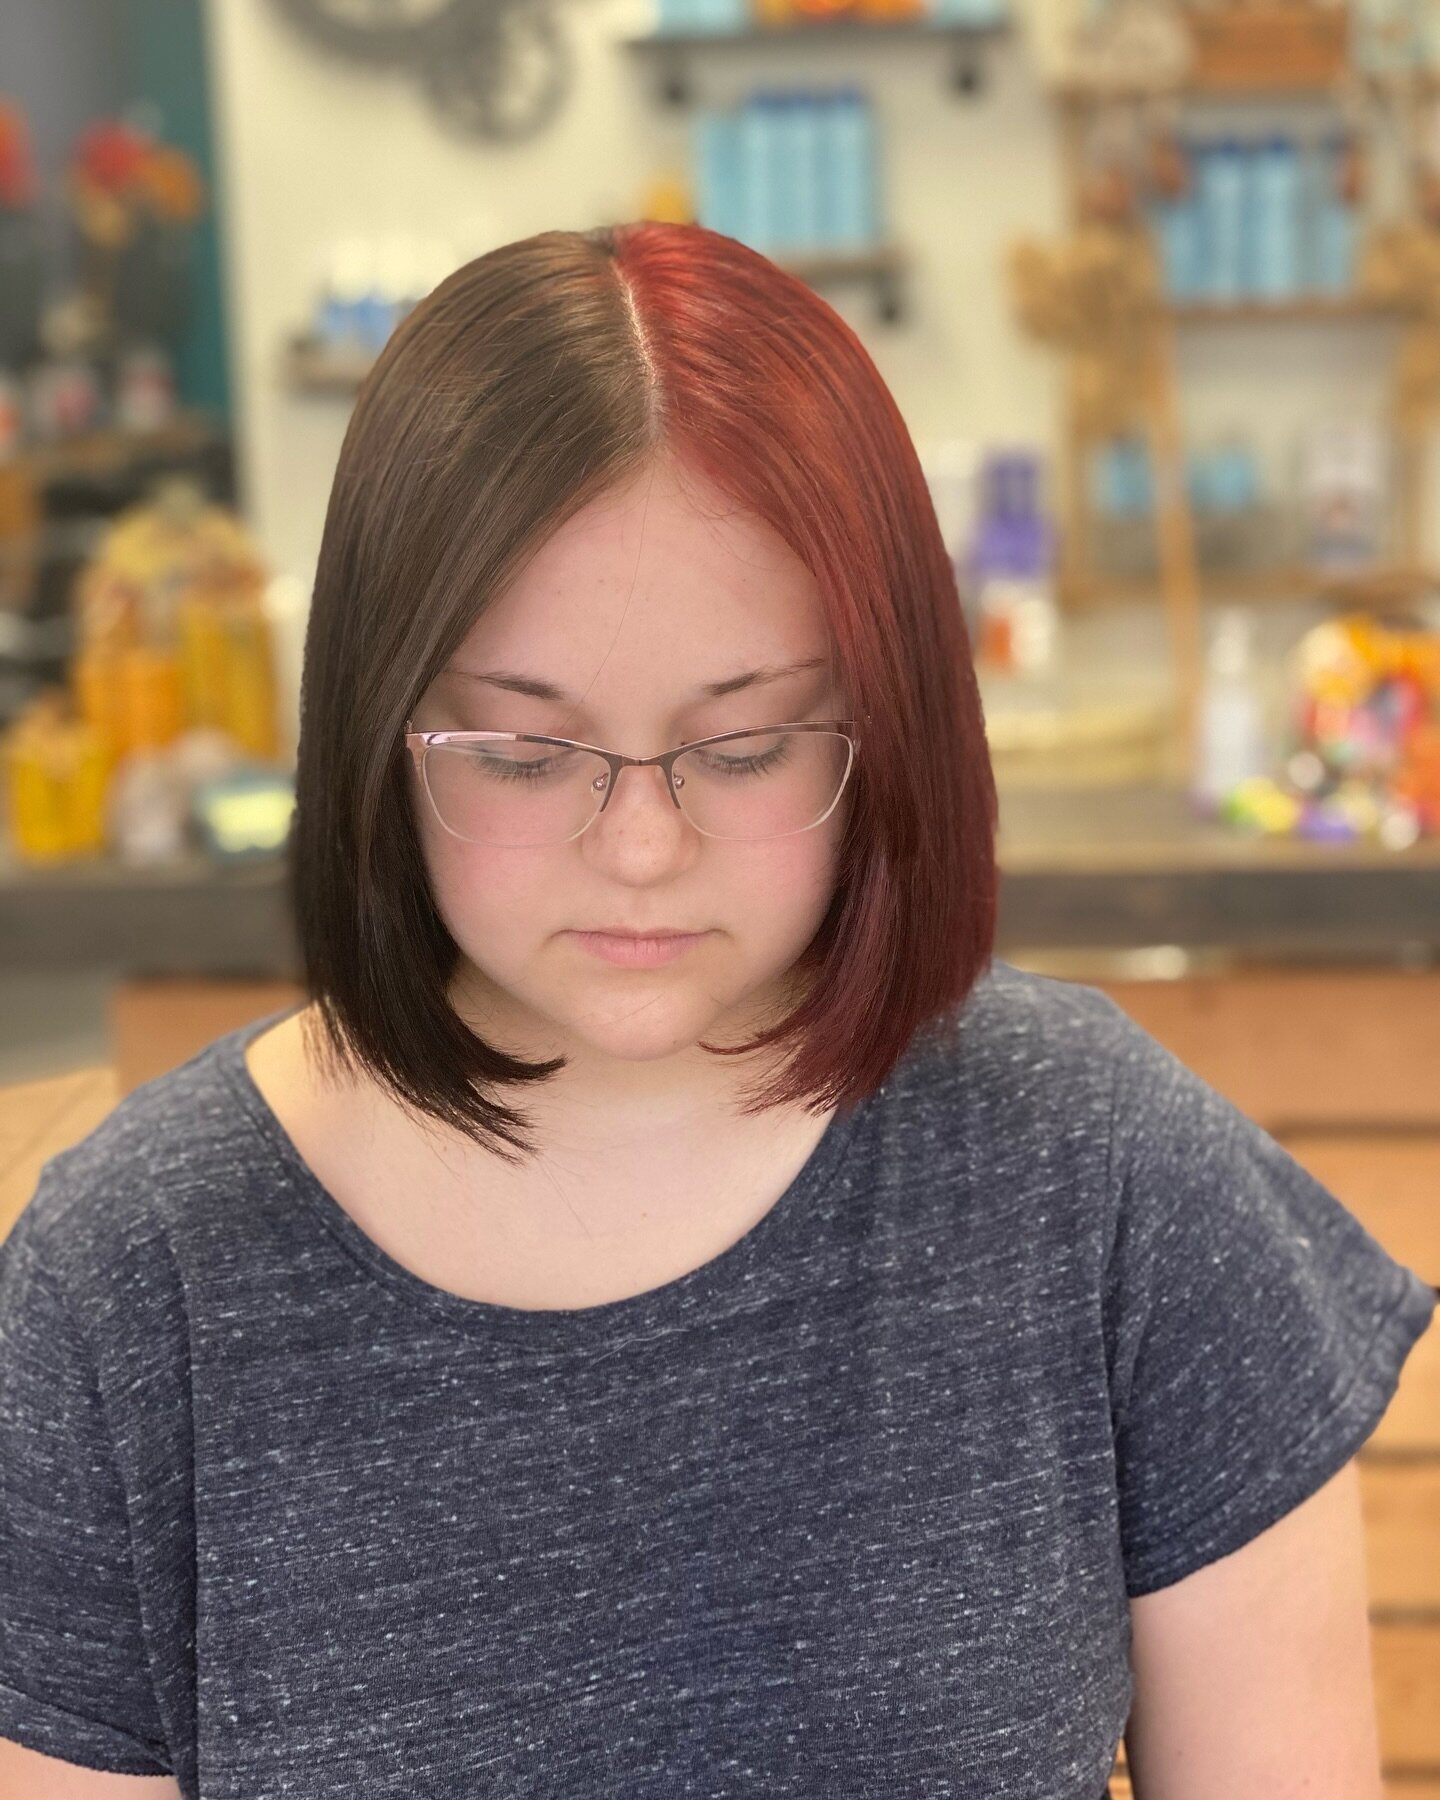 Just because your is a mid length bob, doesn&rsquo;t mean it has to be boring!!
Loving this 1/2 and 1/2 color look on this young teen. To book a color, clink the website link in my bio.